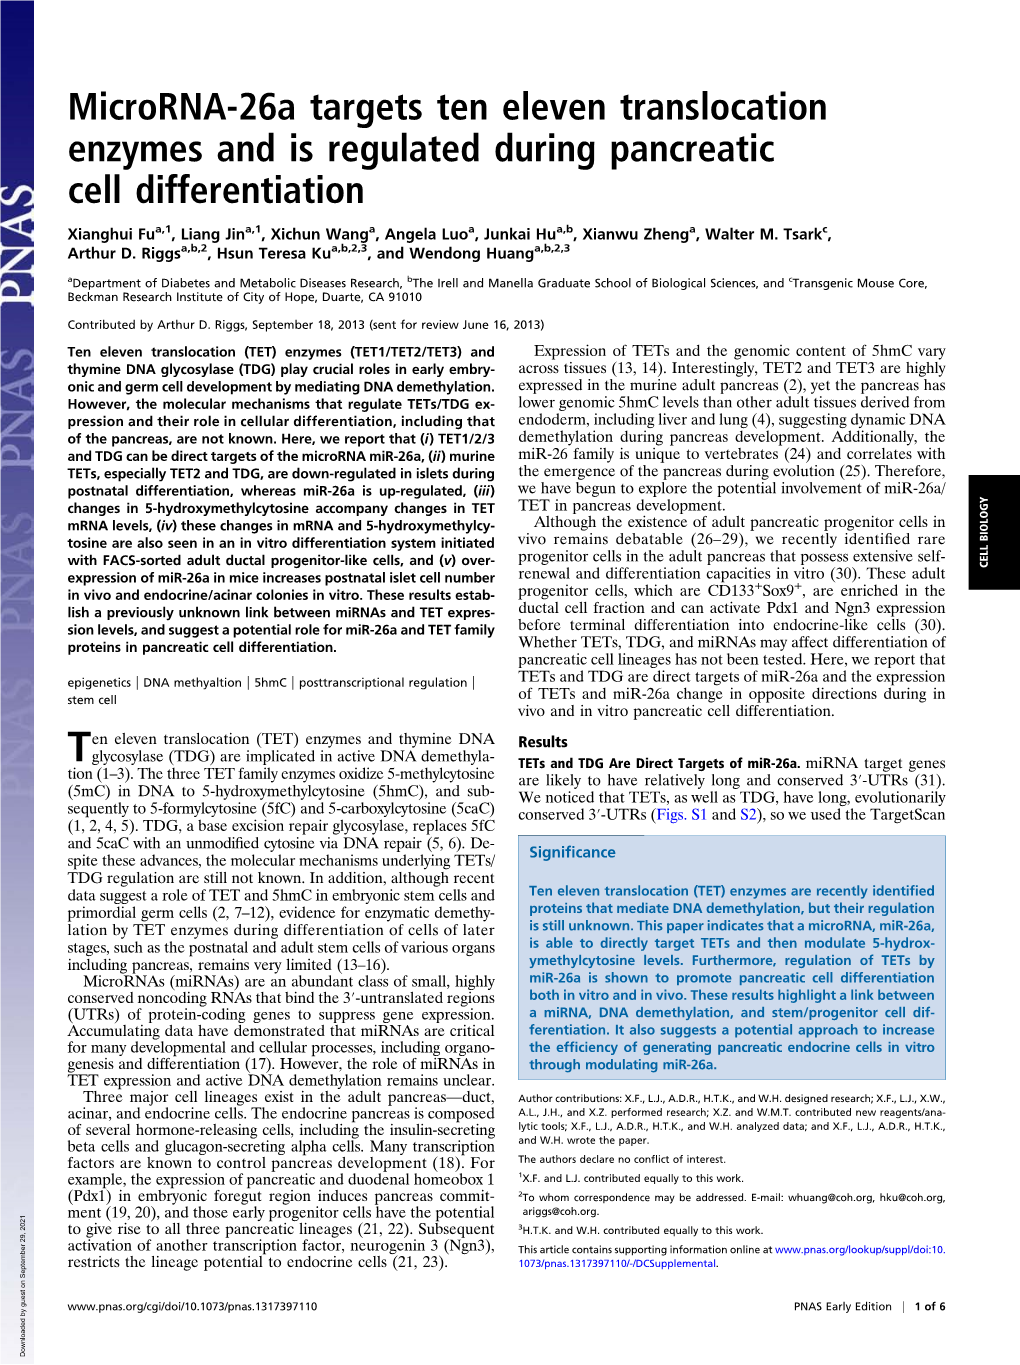 Microrna-26A Targets Ten Eleven Translocation Enzymes and Is Regulated During Pancreatic Cell Differentiation